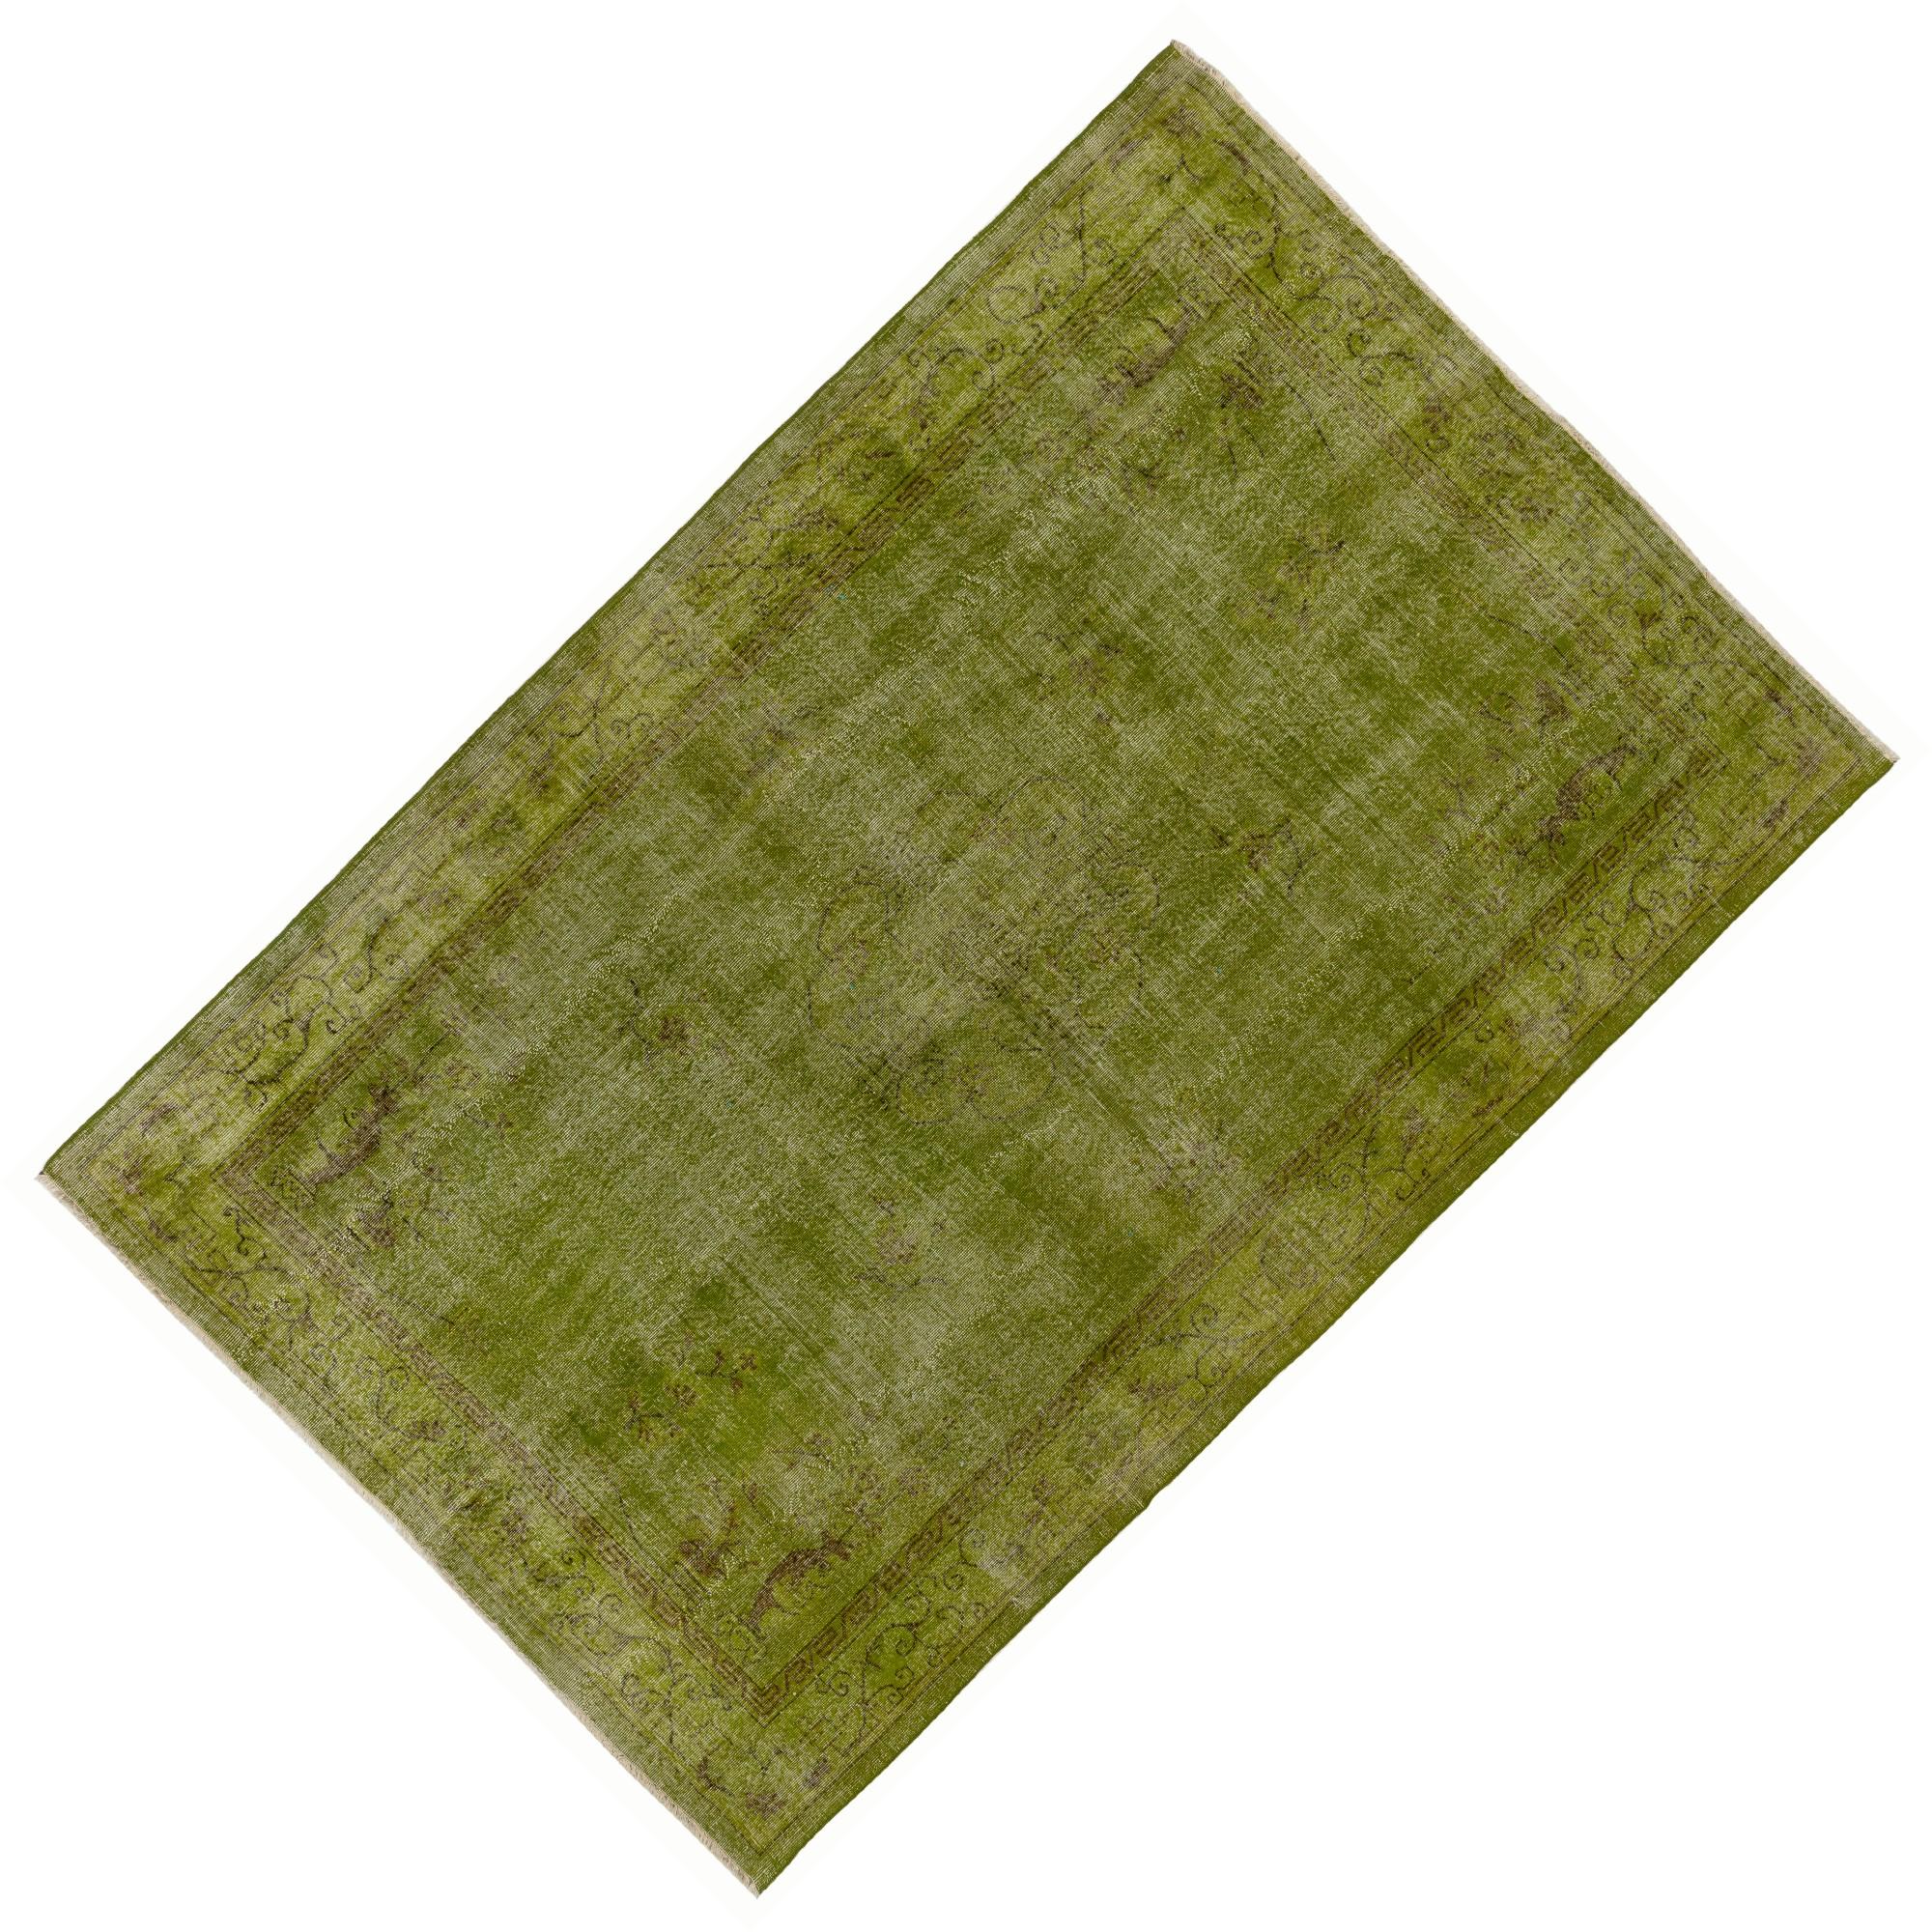 Mid-20th Century 7.4x10.7 Ft  Vintage Handmade Rug Re-dyed in Chartreuse, Art Deco Chinese Design